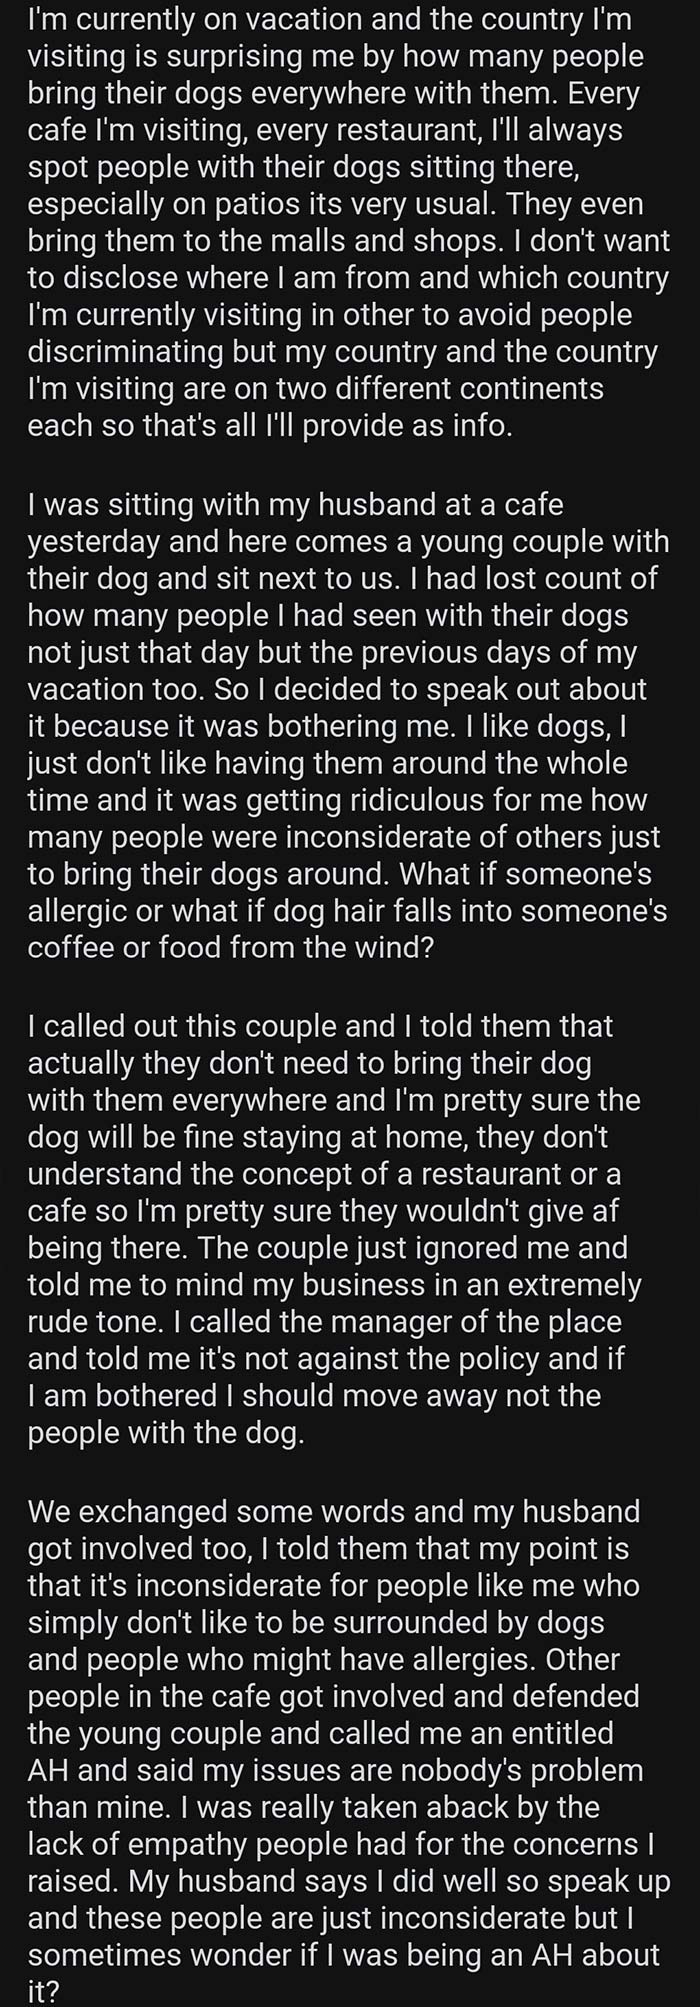 Karen Vacations In Another Country, Doesn't Like That People Take Their Dogs Everywhere With Them, And Speaks To The Manager